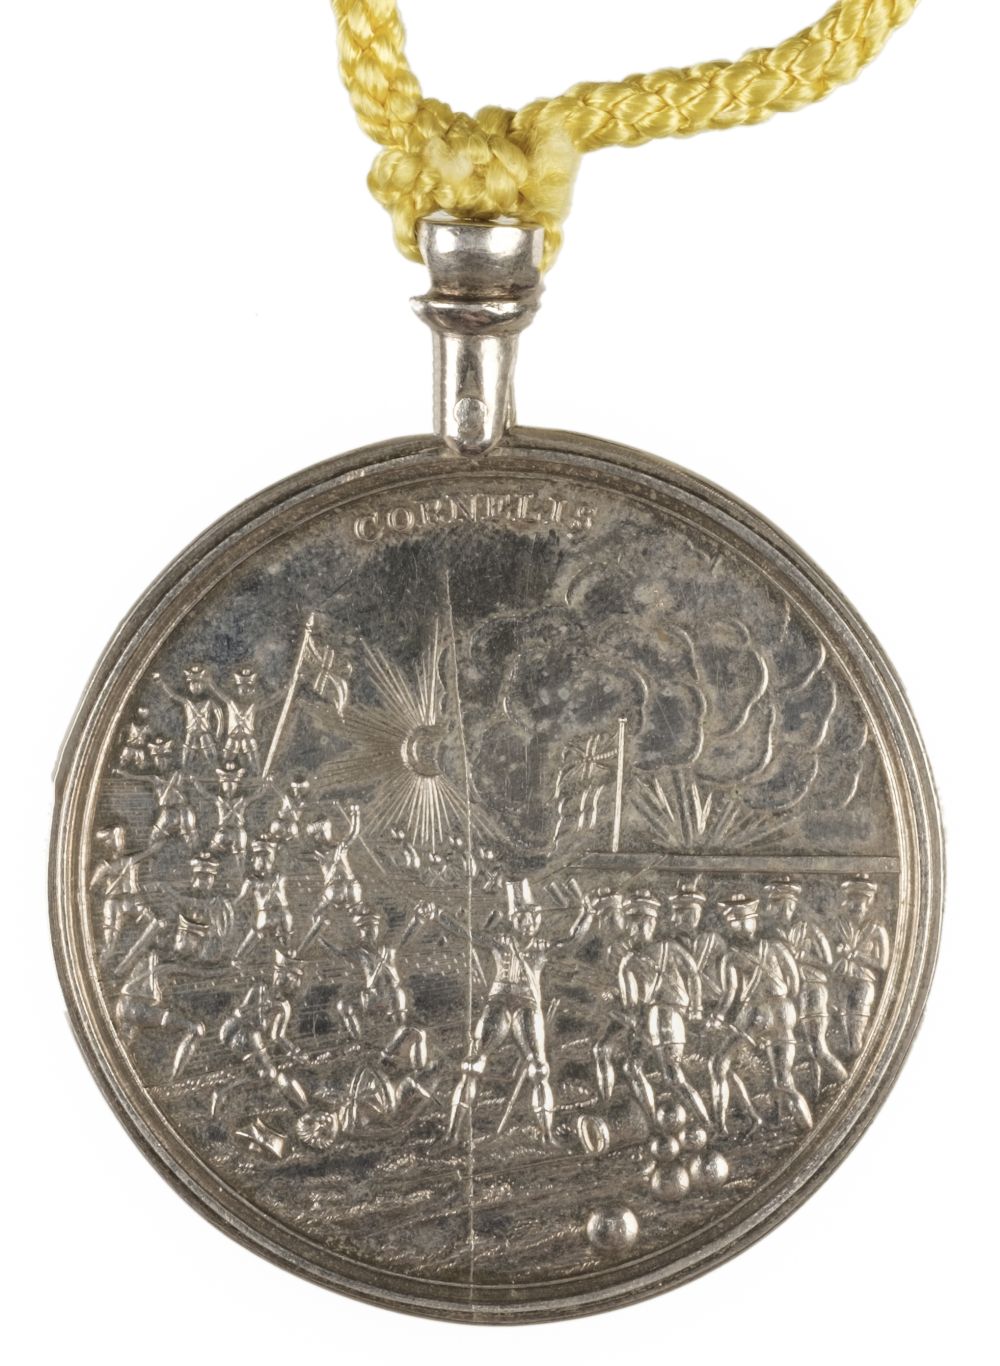 Java 1811. Honourable East India Company Medal, silver, unnamed